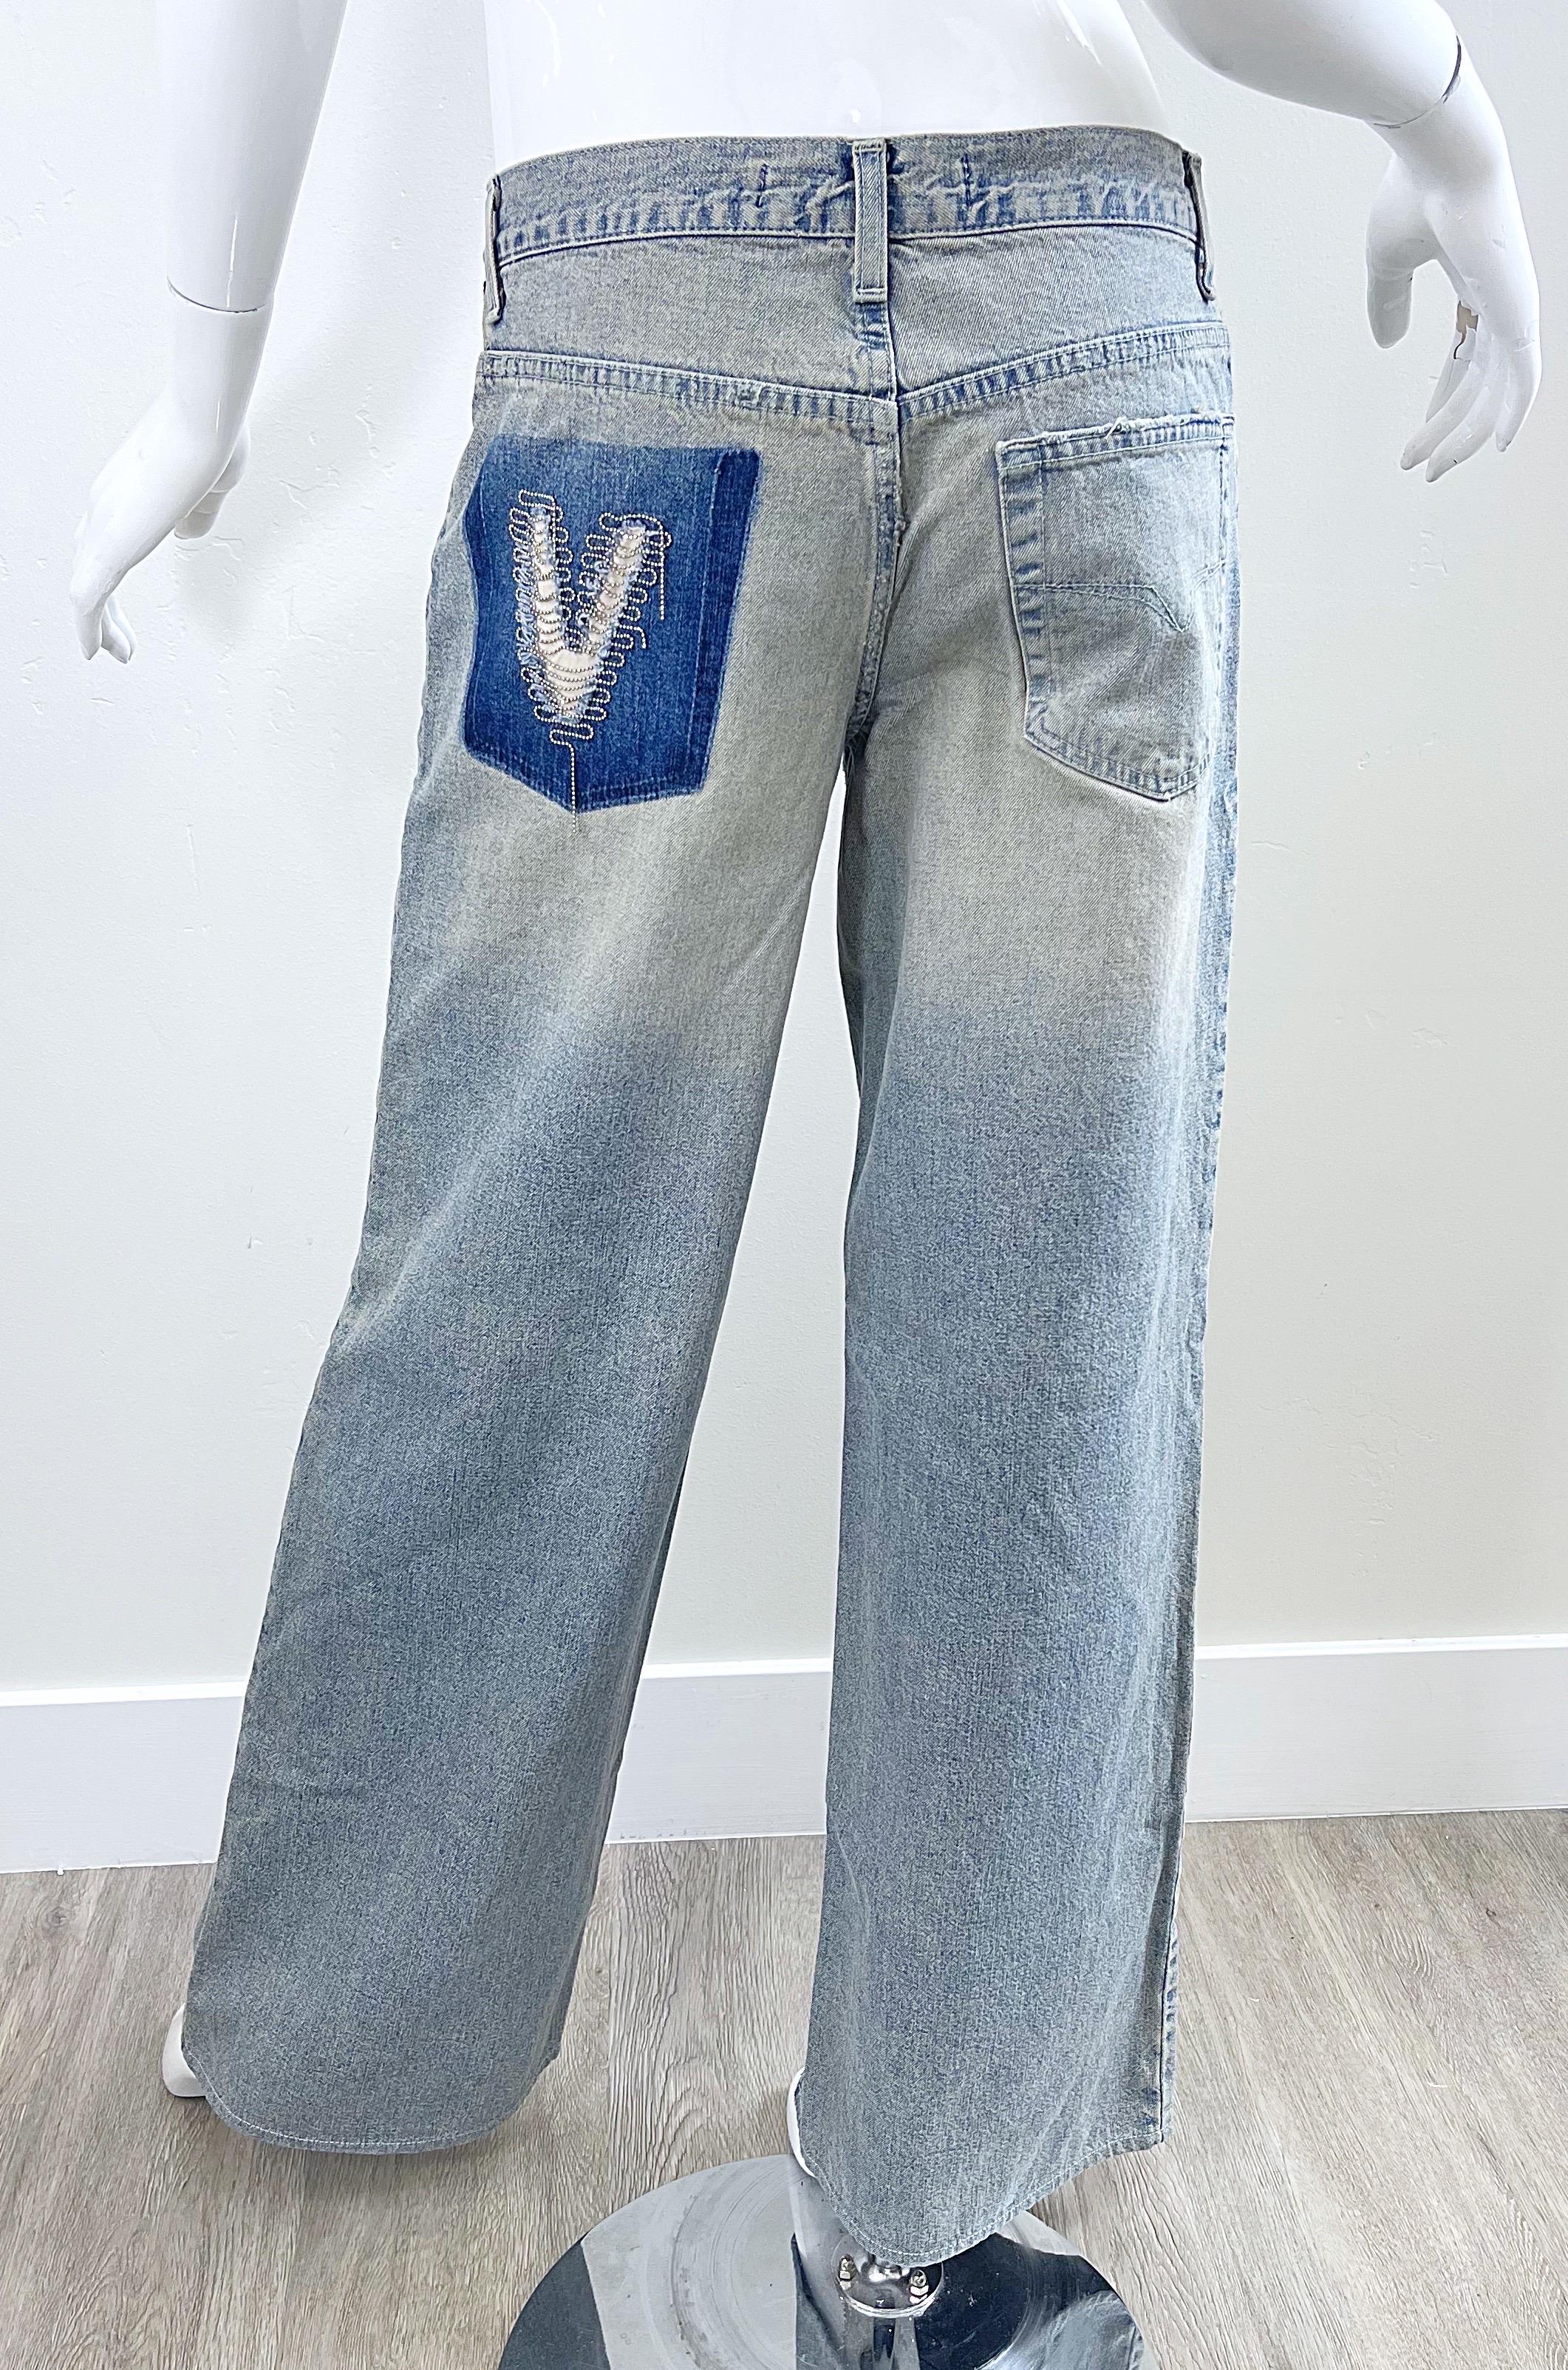 2000s Gianni Versace Jeans Couture Size 8 Chain Stonewash Low Rise Wide Leg Pant In Excellent Condition For Sale In San Diego, CA